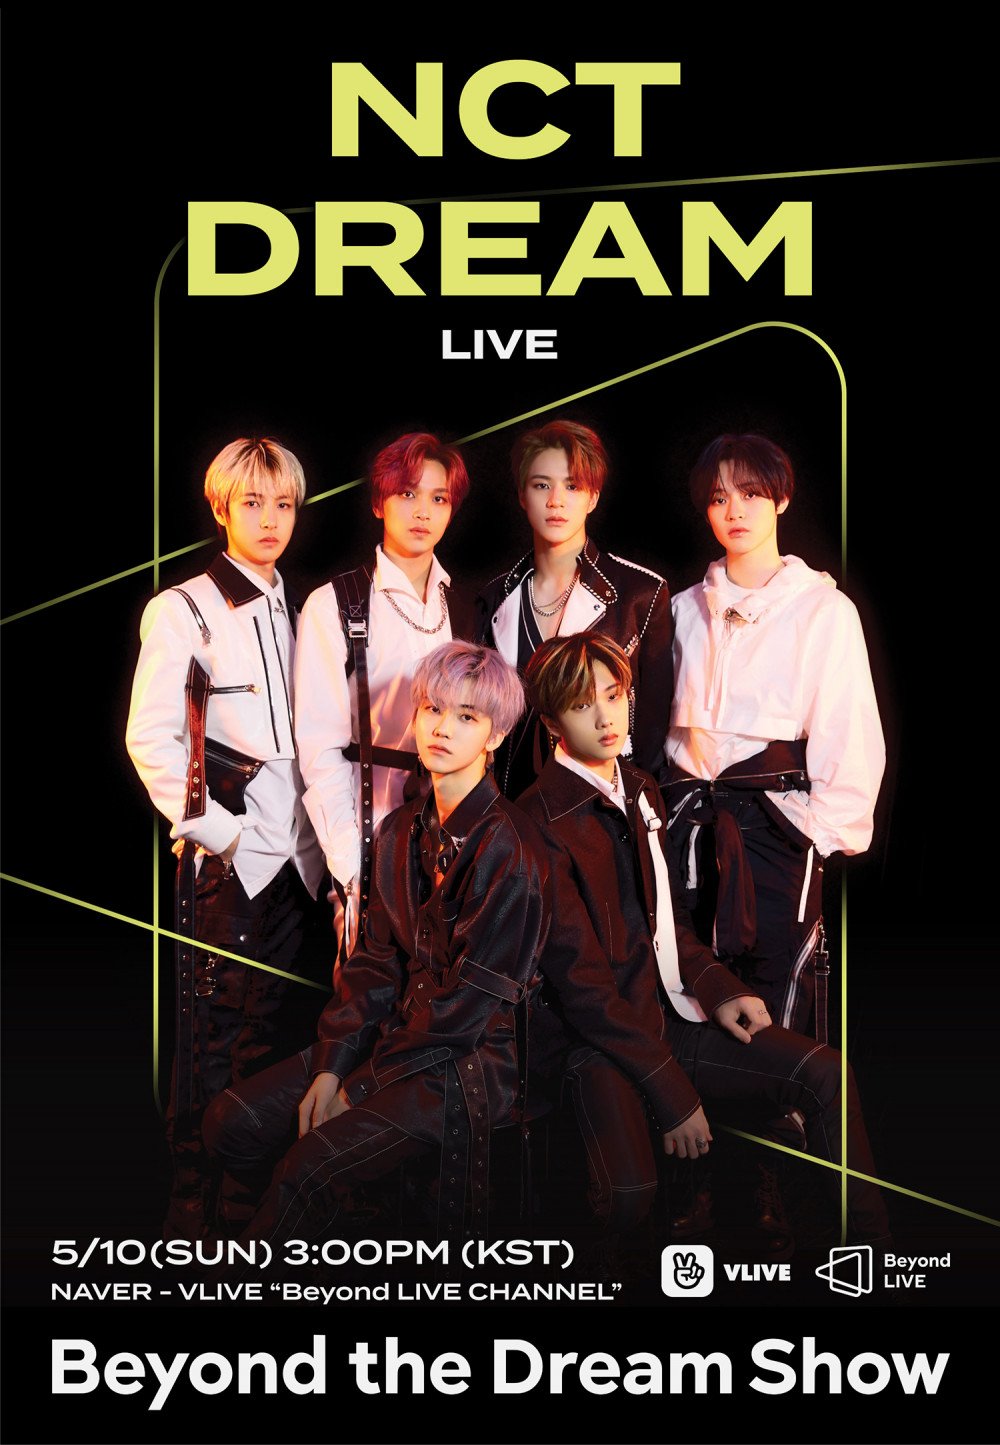 NCT DREAM will be the Third Artist on BEYOND LIVE